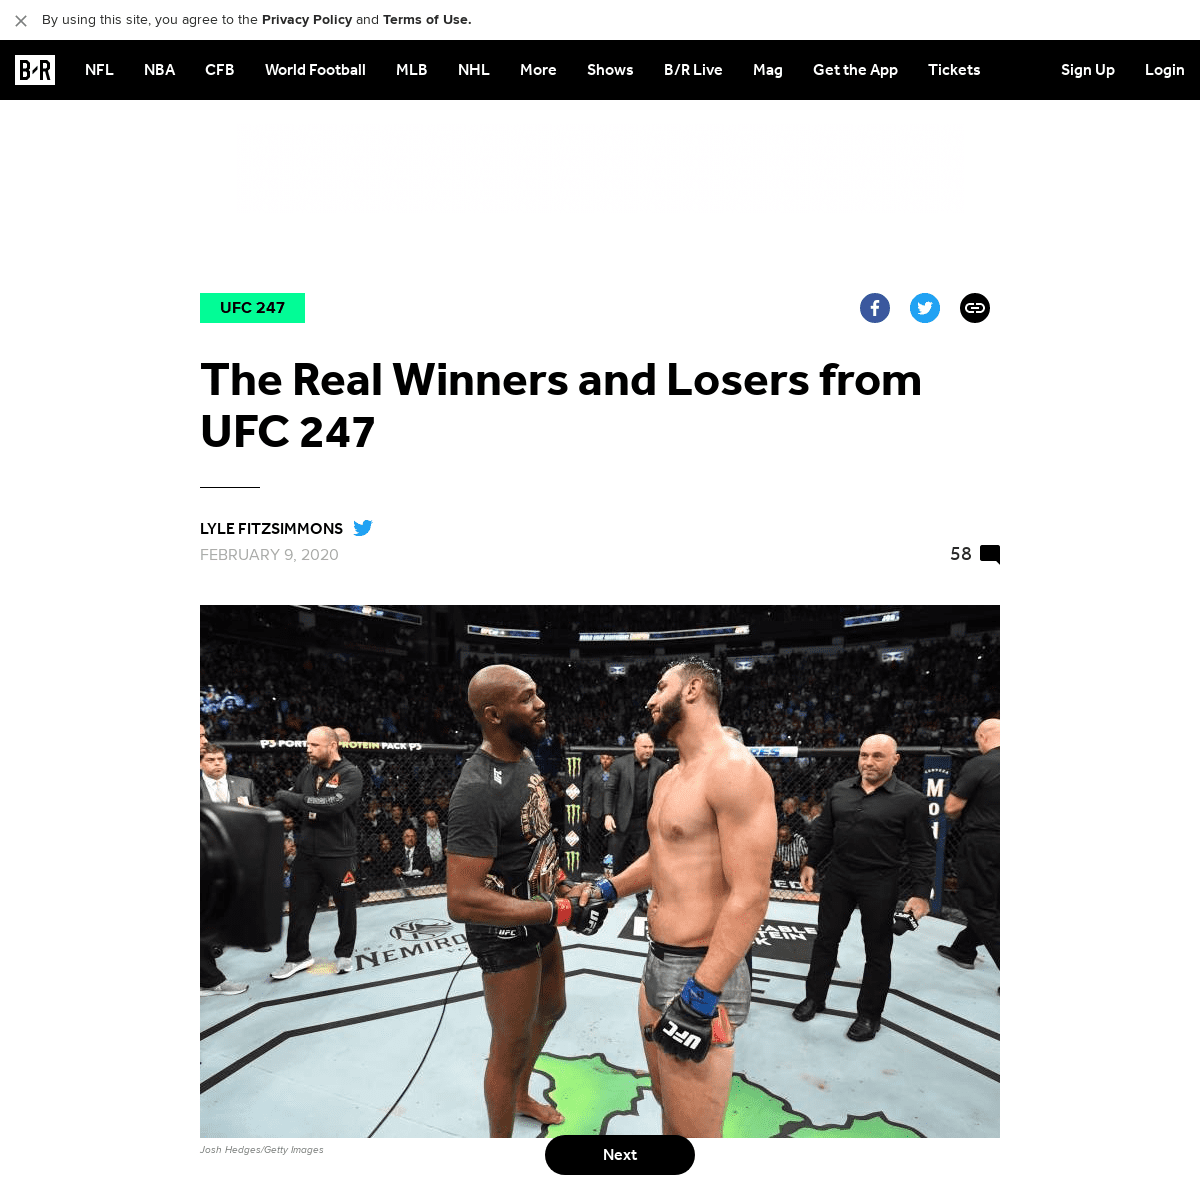 A complete backup of bleacherreport.com/articles/2875452-the-real-winners-and-losers-from-ufc-247